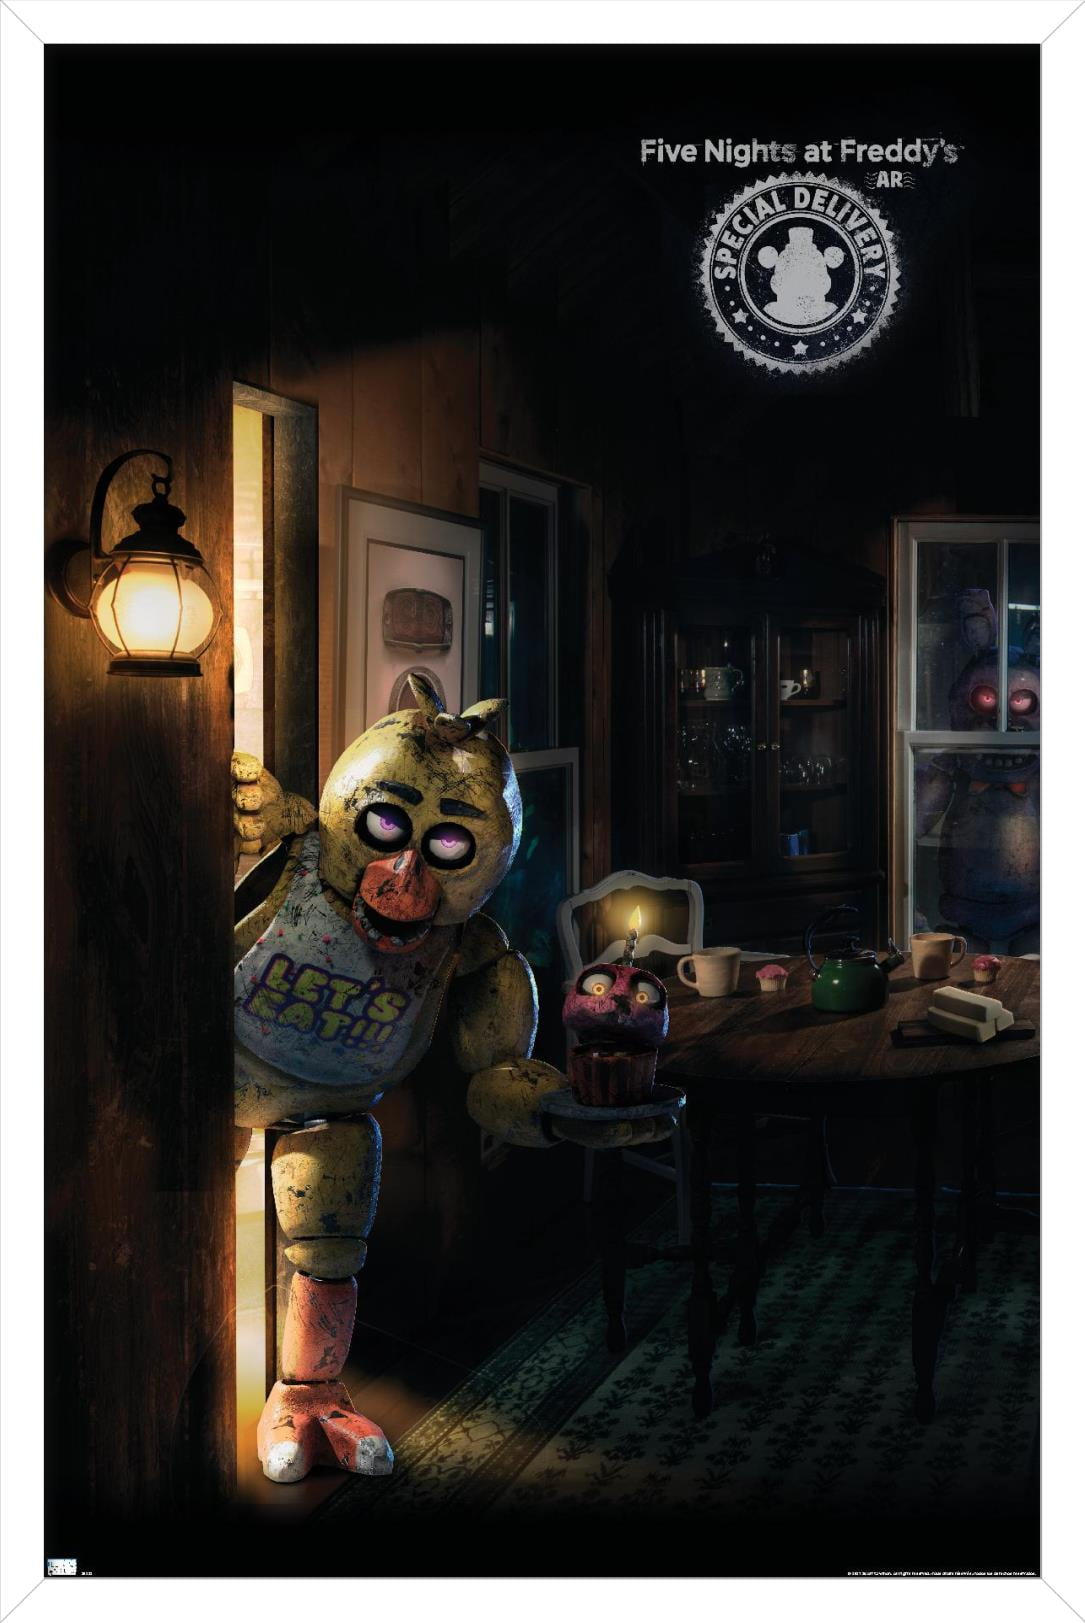 Trends International Five Nights at Freddy's: Security Breach - Group Wall  Poster, 22.375 x 34, Poster & Mount Bundle